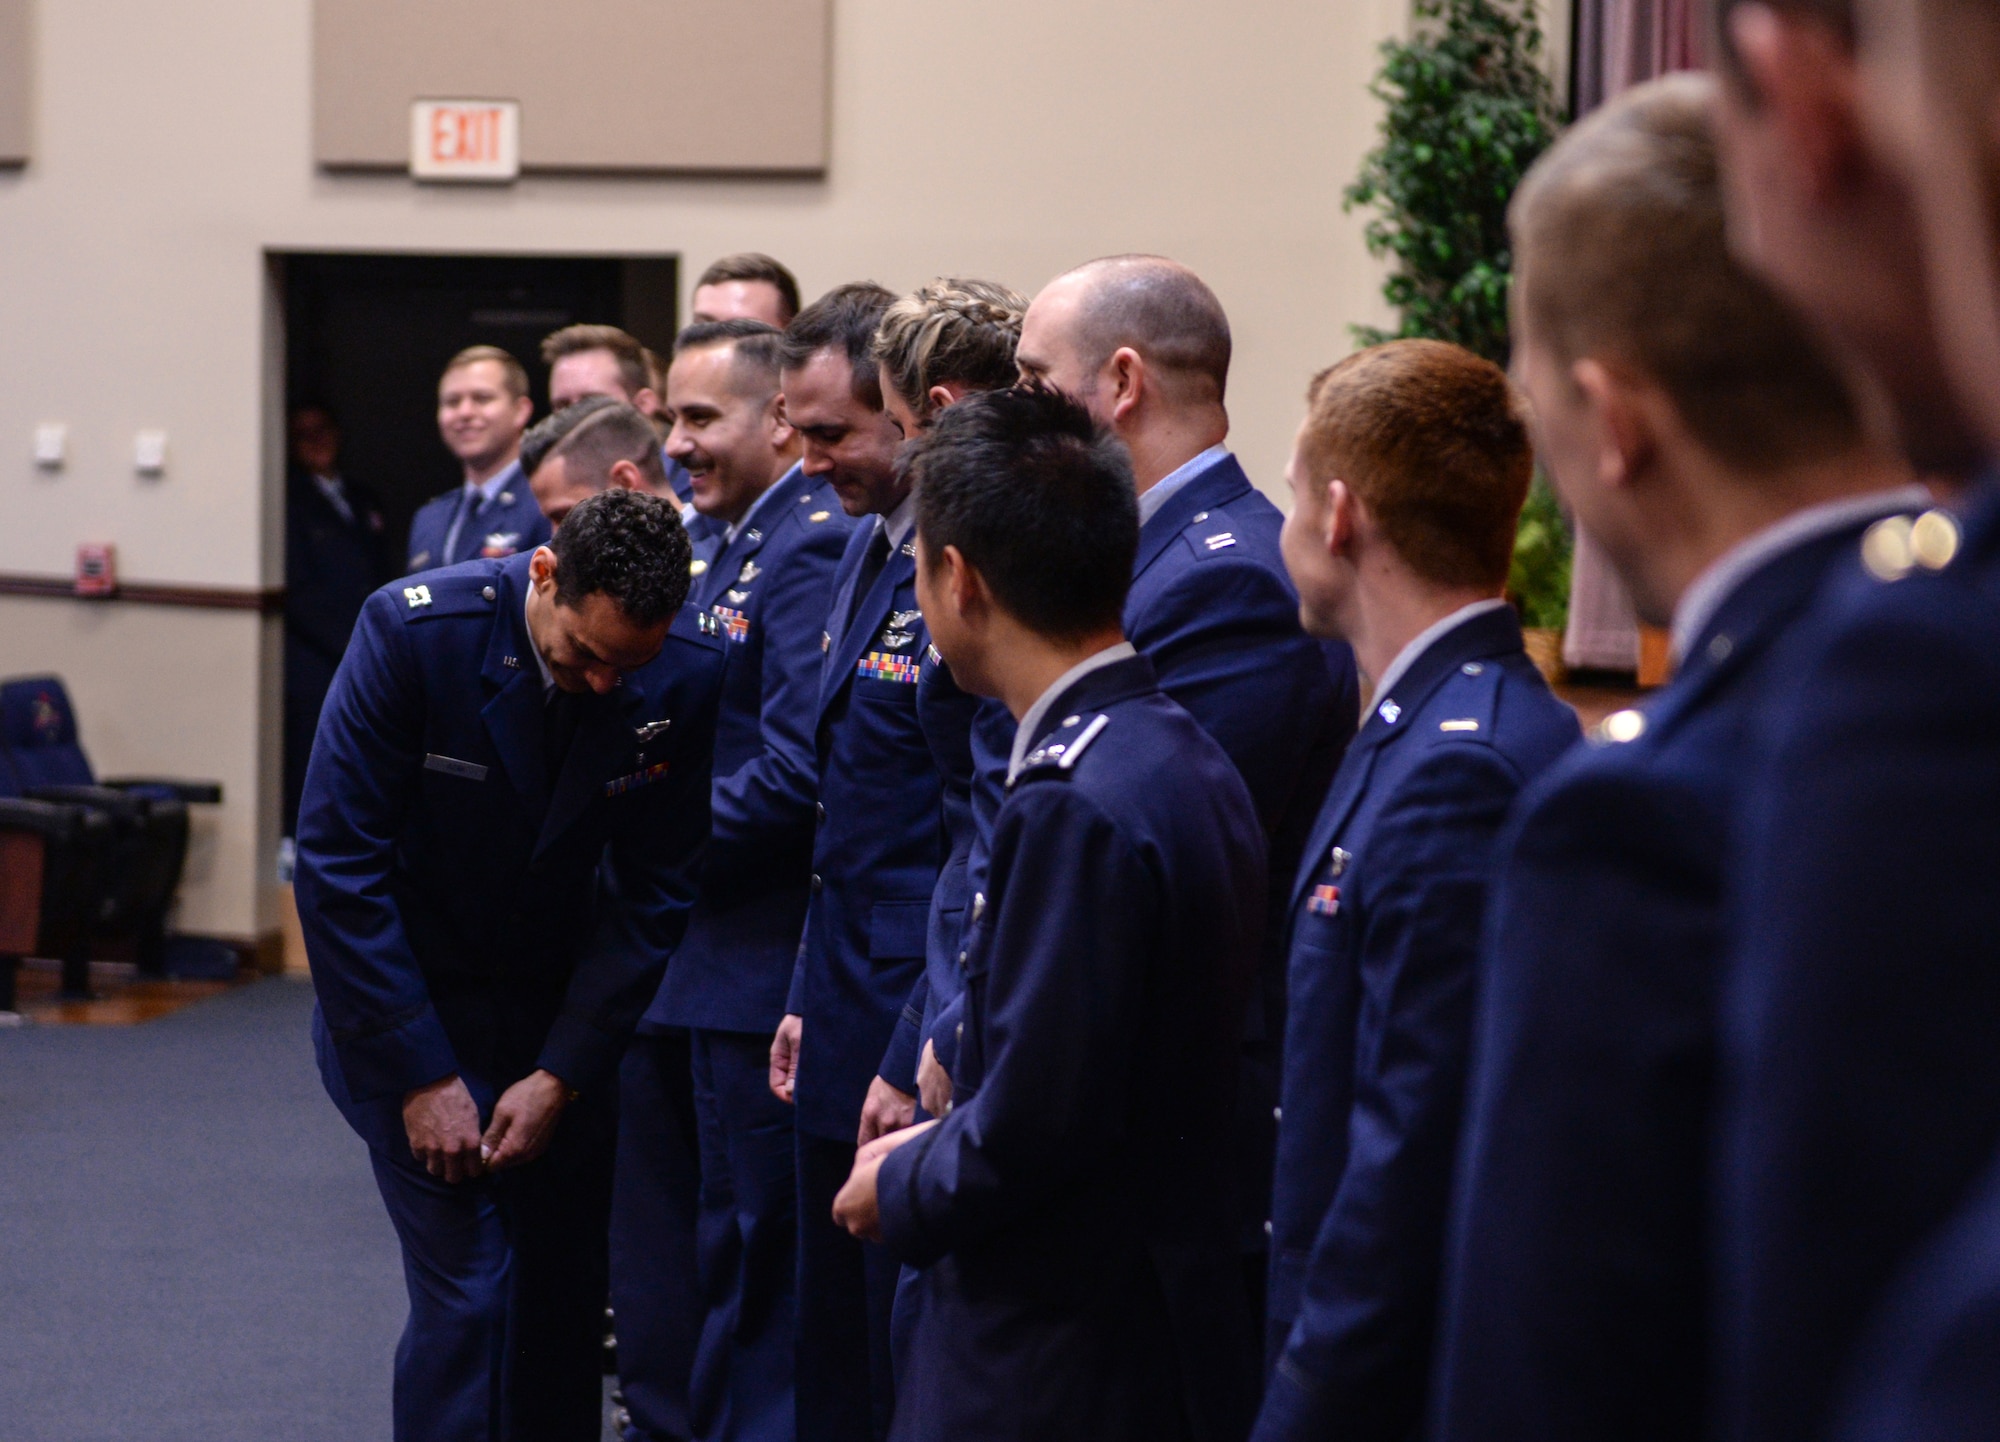 Graduates from Specialized Undergraduate Pilot Training Class 20-08/09 break their “silver wings” at their graduation ceremony Feb. 28, 2020, at Columbus Air Force Base, Mississippi. As tradition and upon graduating pilot training, graduates break their first pair of “silver wings.” (U.S. Air Force photo by Airman Davis Donaldson)